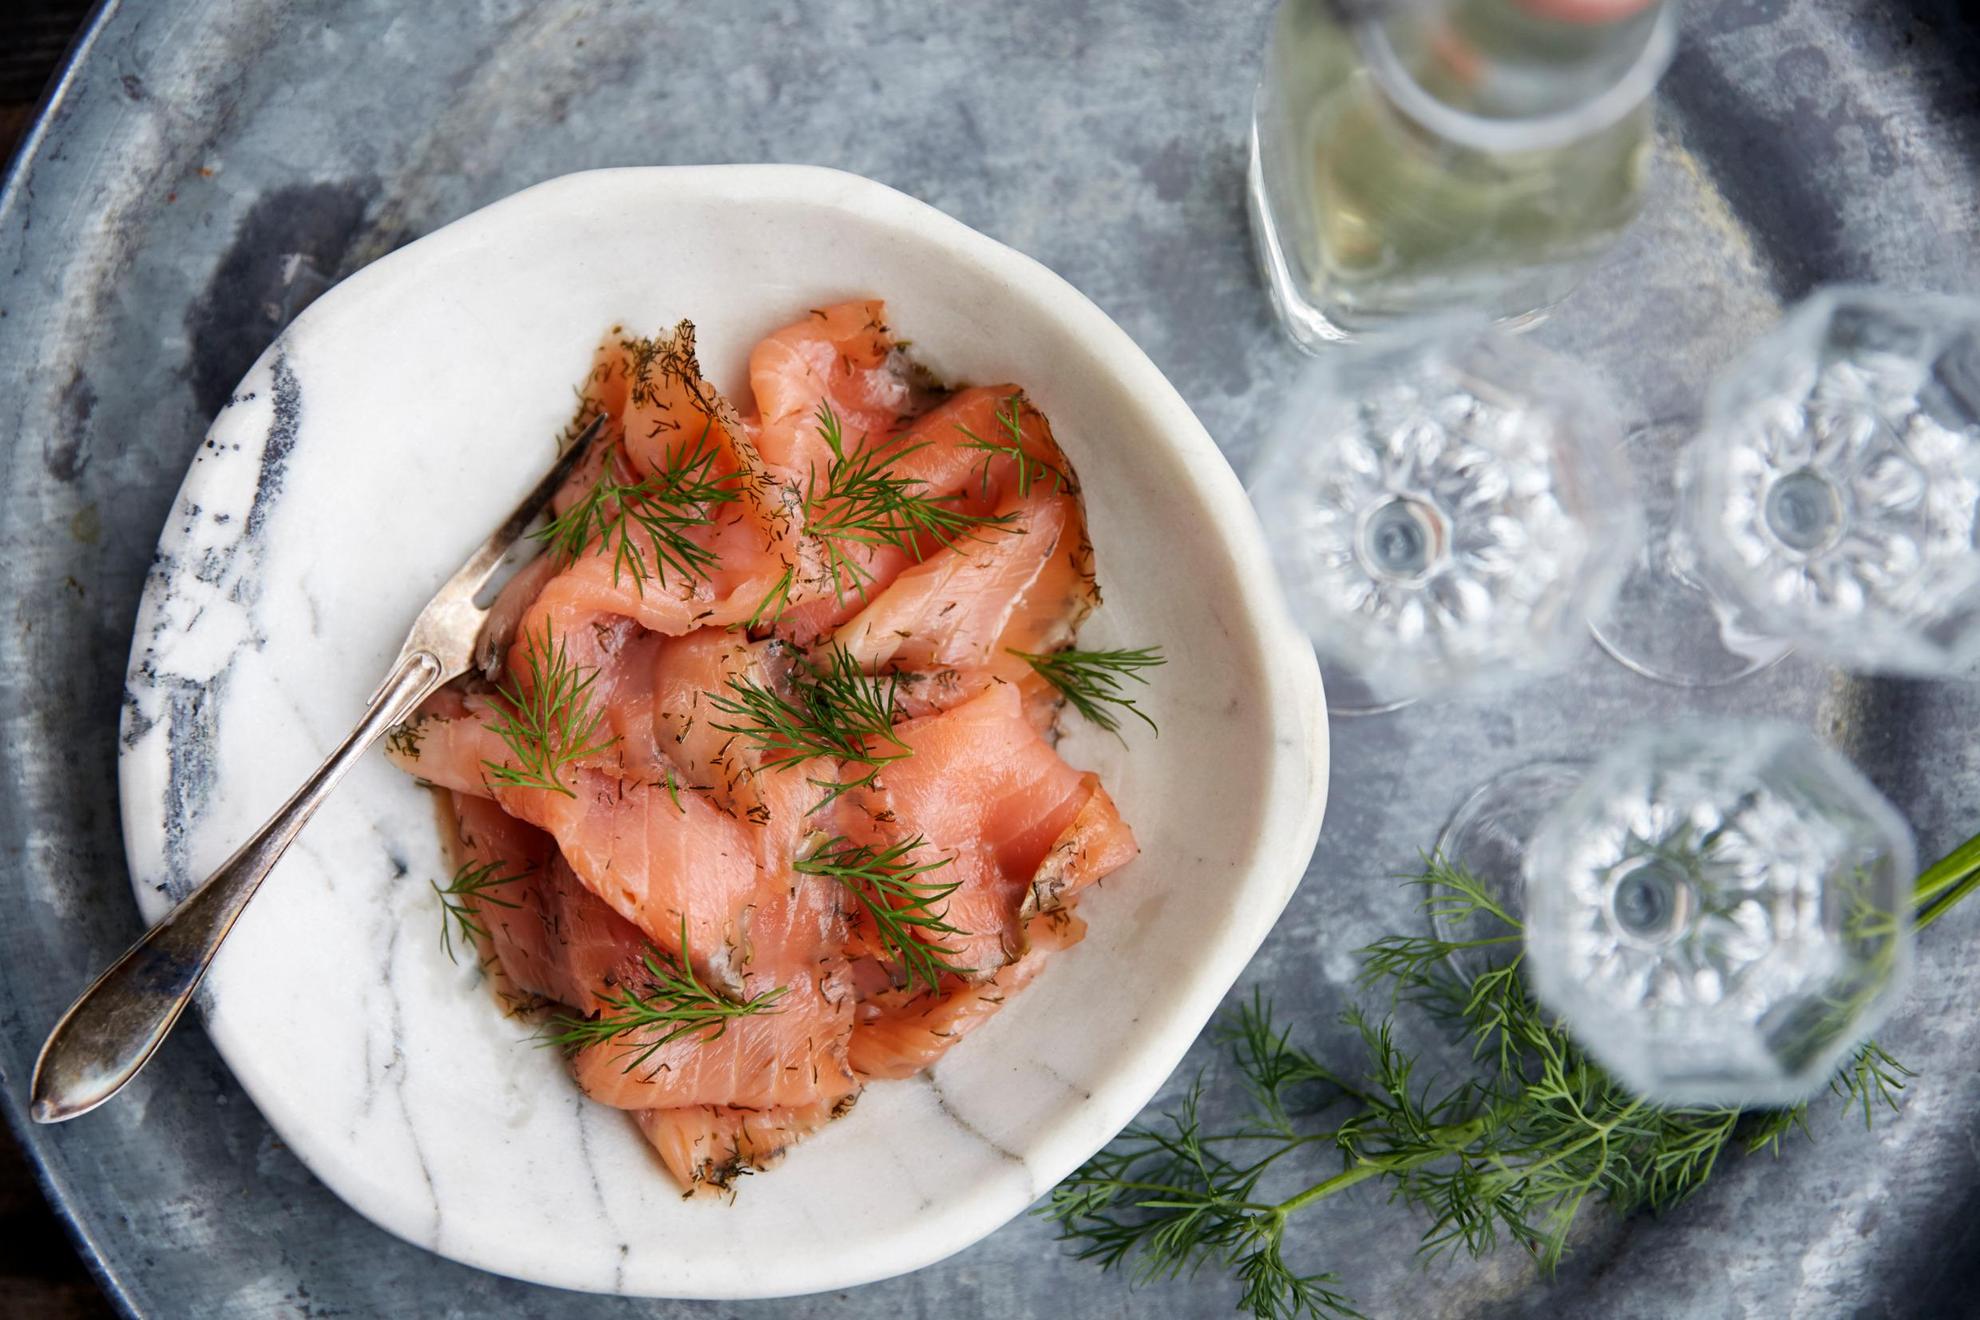 A tray with a plate of cured salmon with dill and a few drink glasses.